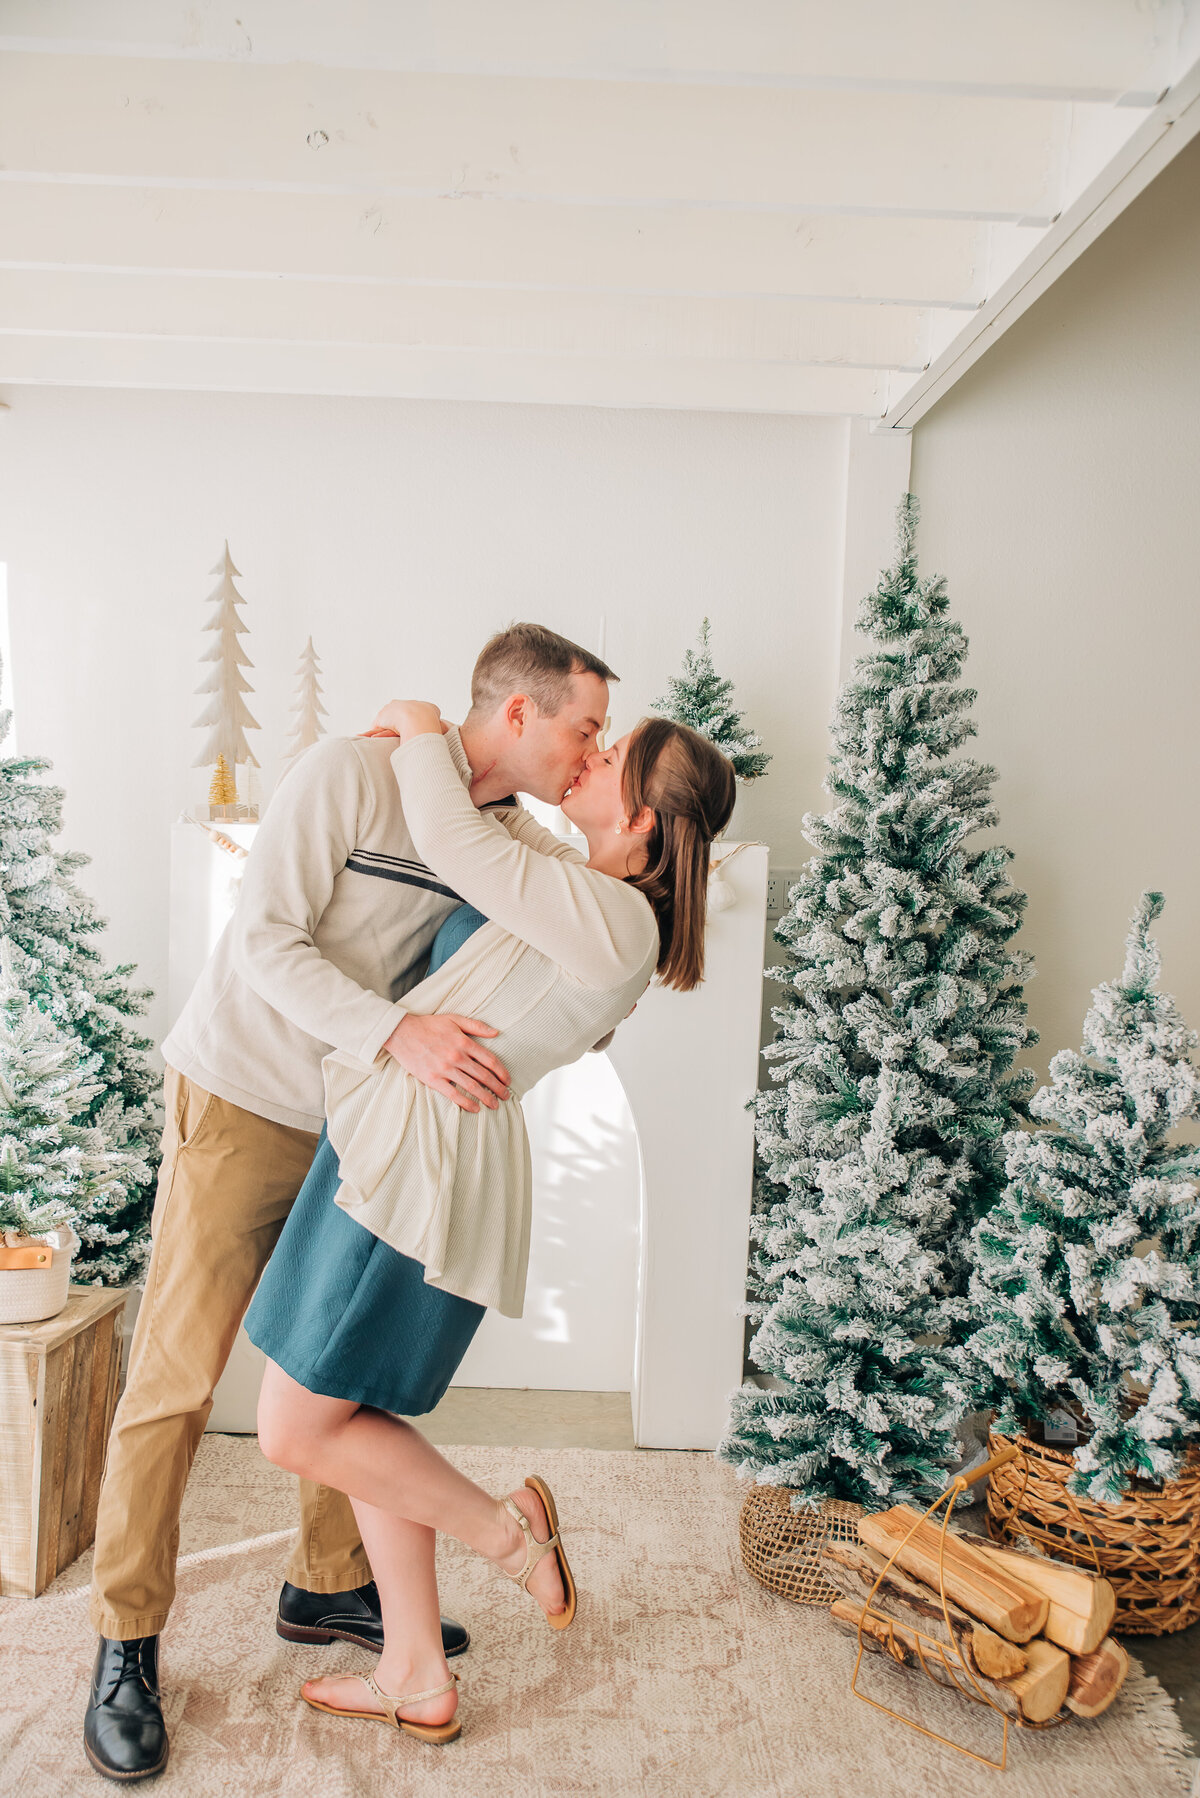 man and woman kissing together in a studio denver family photo session taken by colorado wedding photographers